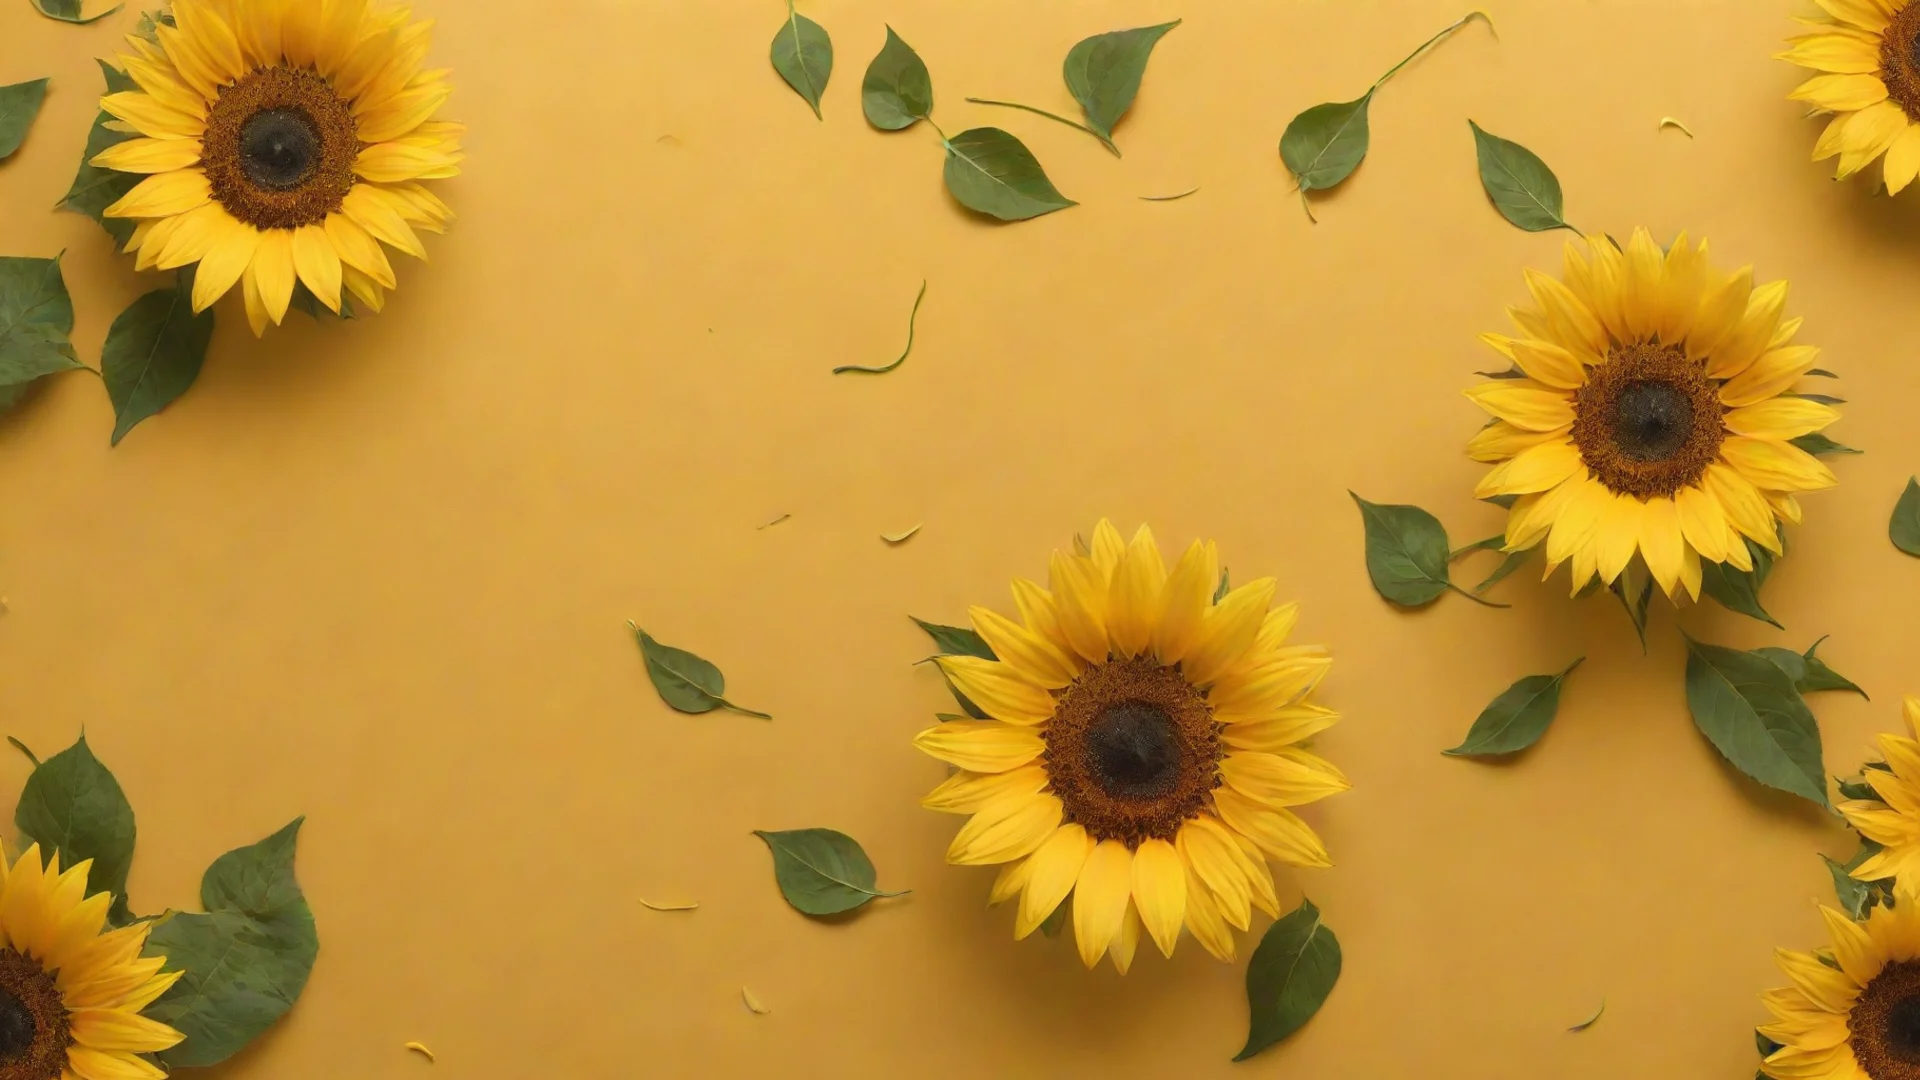 amazing swirling yellow background with sunflowers strewn about awesome portrait 2 wide